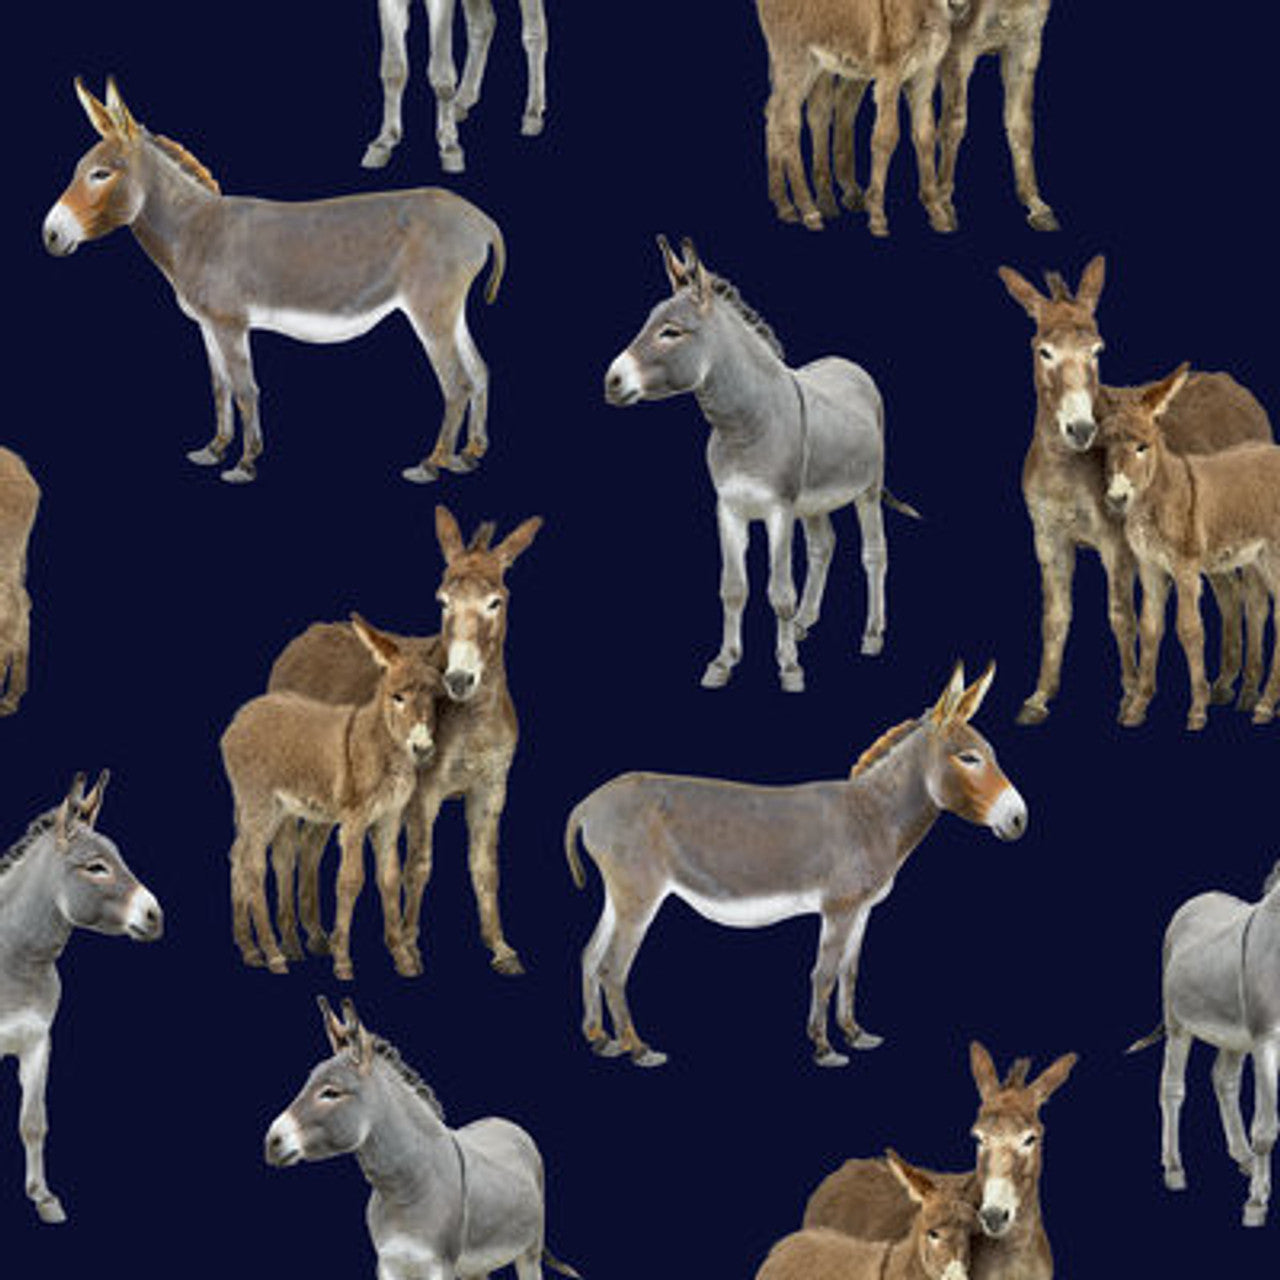 PRE-ORDER Quirky Cotton Donkey Foal Animal Equine Navy (PRE-ORDER QC Donkeys)